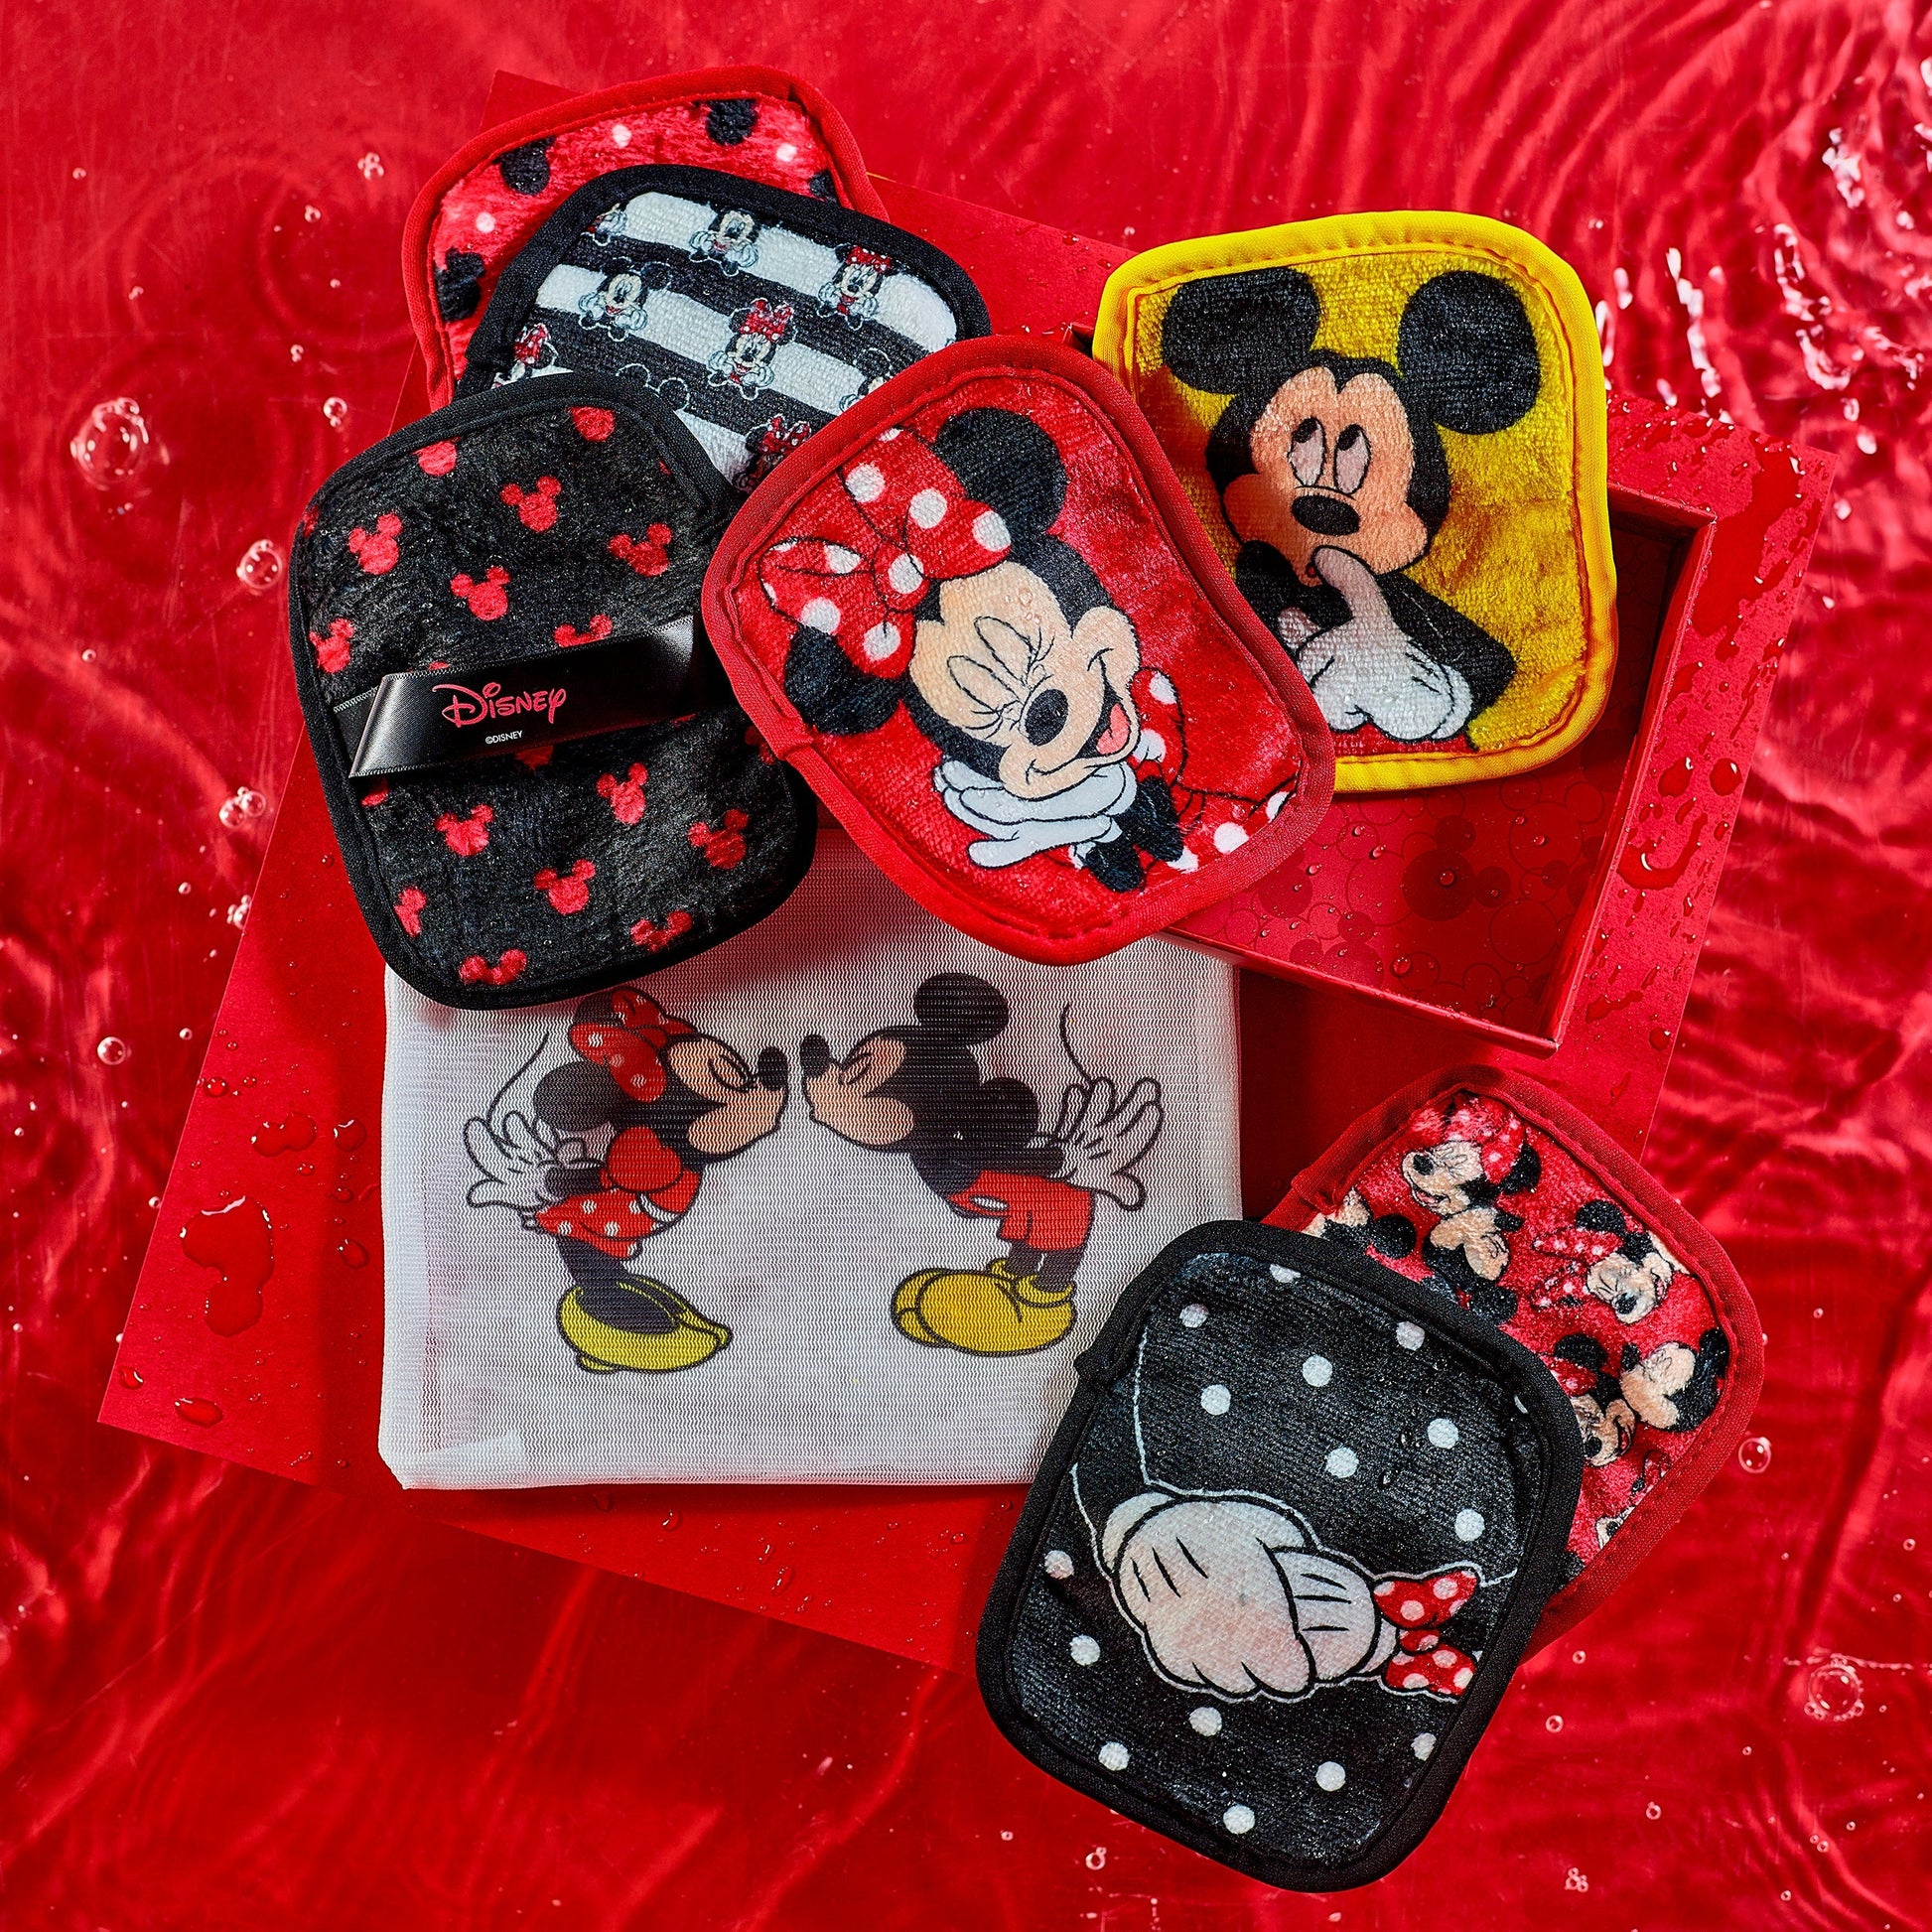 Mickey & Minnie 7-Day Set packaging next to laundry bag and cloths.